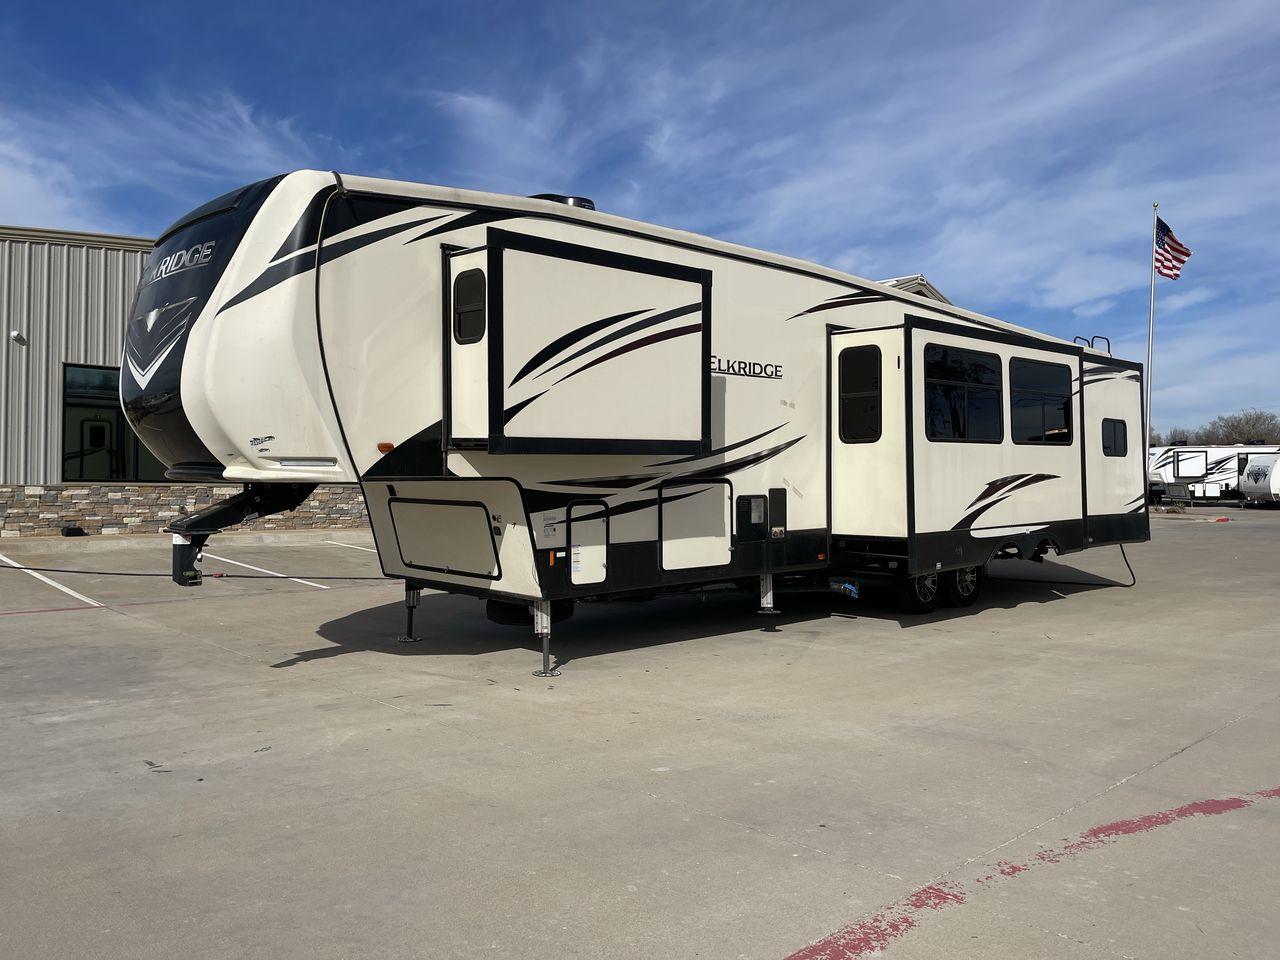 2020 BEIGE HEARTLAND ELKRIDGE 38RSRT (5SFRG4228LE) , Length: 41.75 ft. | Dry Weight: 13,450 lbs. | Gross Weight: 15,500 lbs. | Slides: 5 transmission, located at 4319 N Main St, Cleburne, TX, 76033, (817) 678-5133, 32.385960, -97.391212 - This 2020 Heartland ElkRidge 38RSRT is a dual-axle aluminum wheel setup measuring 41.75 ft. in length and 13.25 ft. in height. It has a dry weight of 13,450 lbs. and a GVWR of 15,500 lbs. It also comes equipped with automatic heating and cooling rated at 35,000 and 15,000 BTUs respectively. This fif - Photo #28